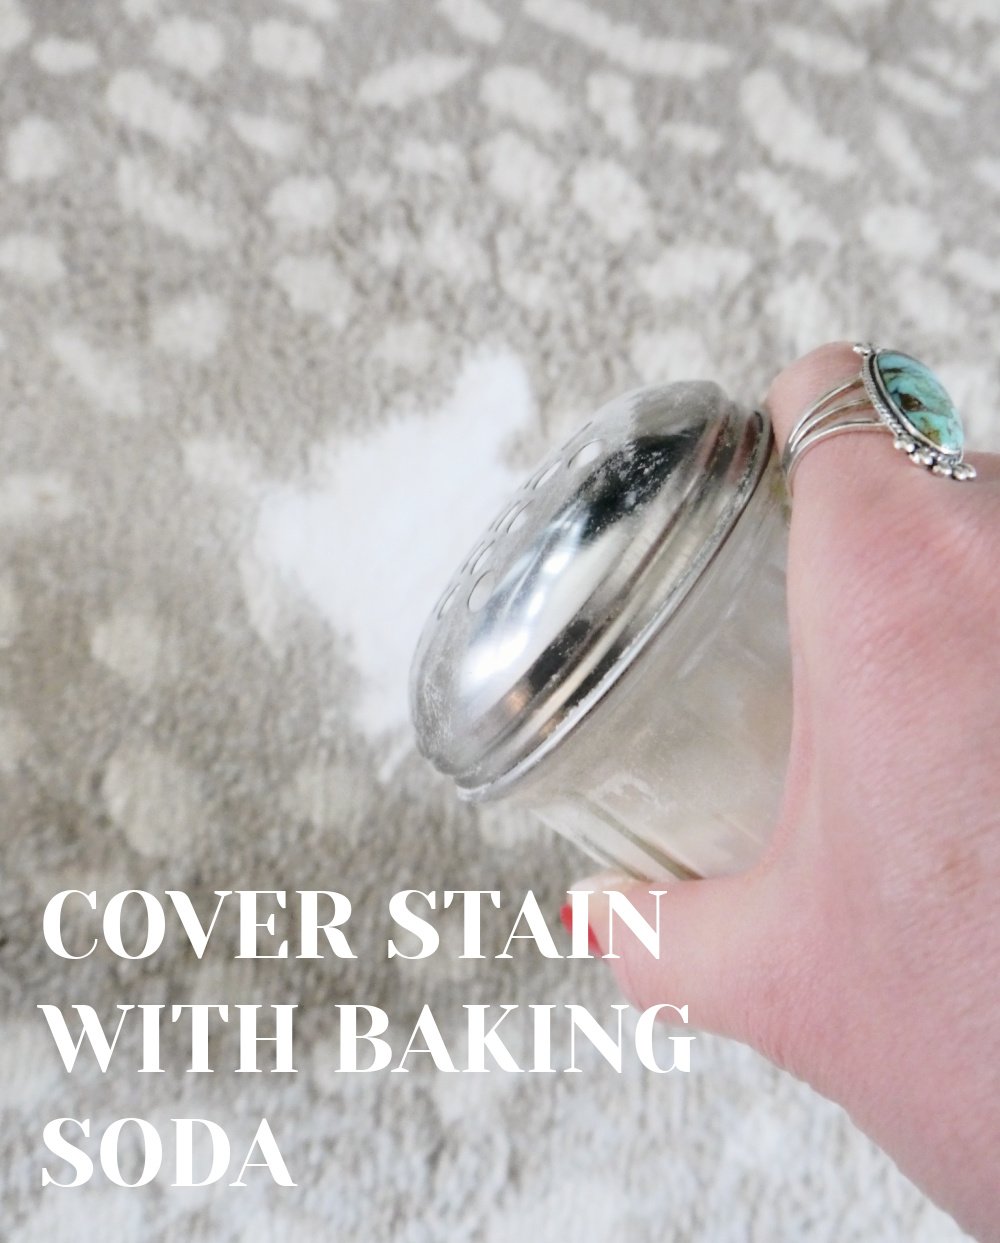 Pouring baking soda over stain.